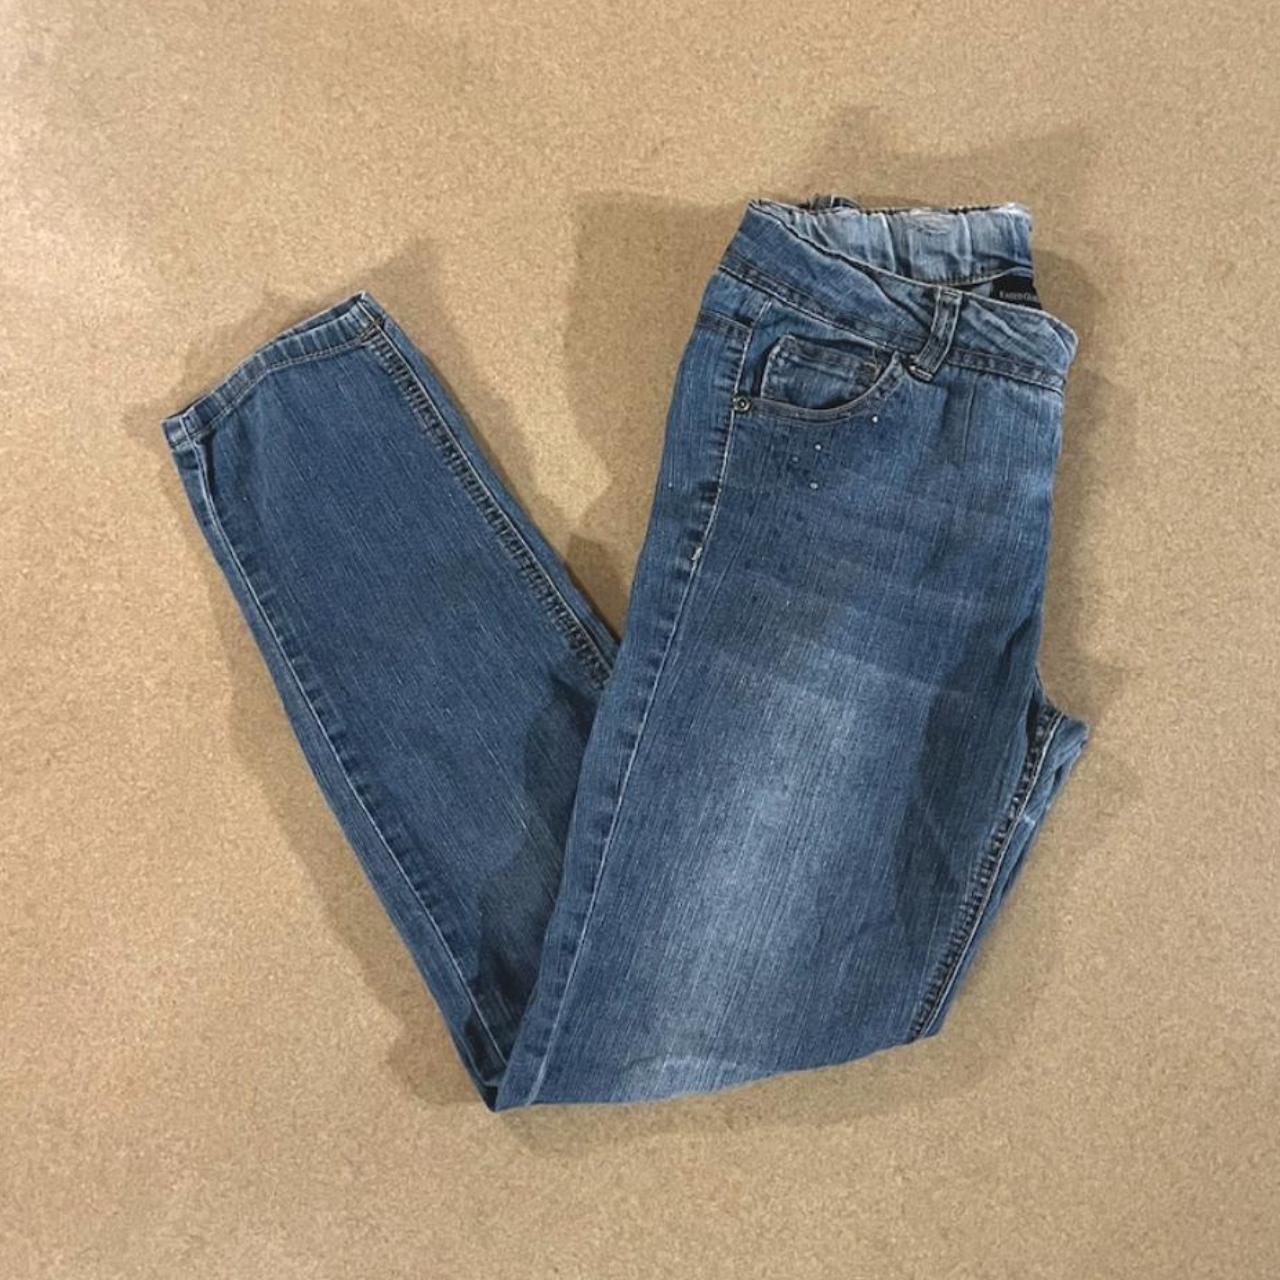 Faded Glory jeans size 10S